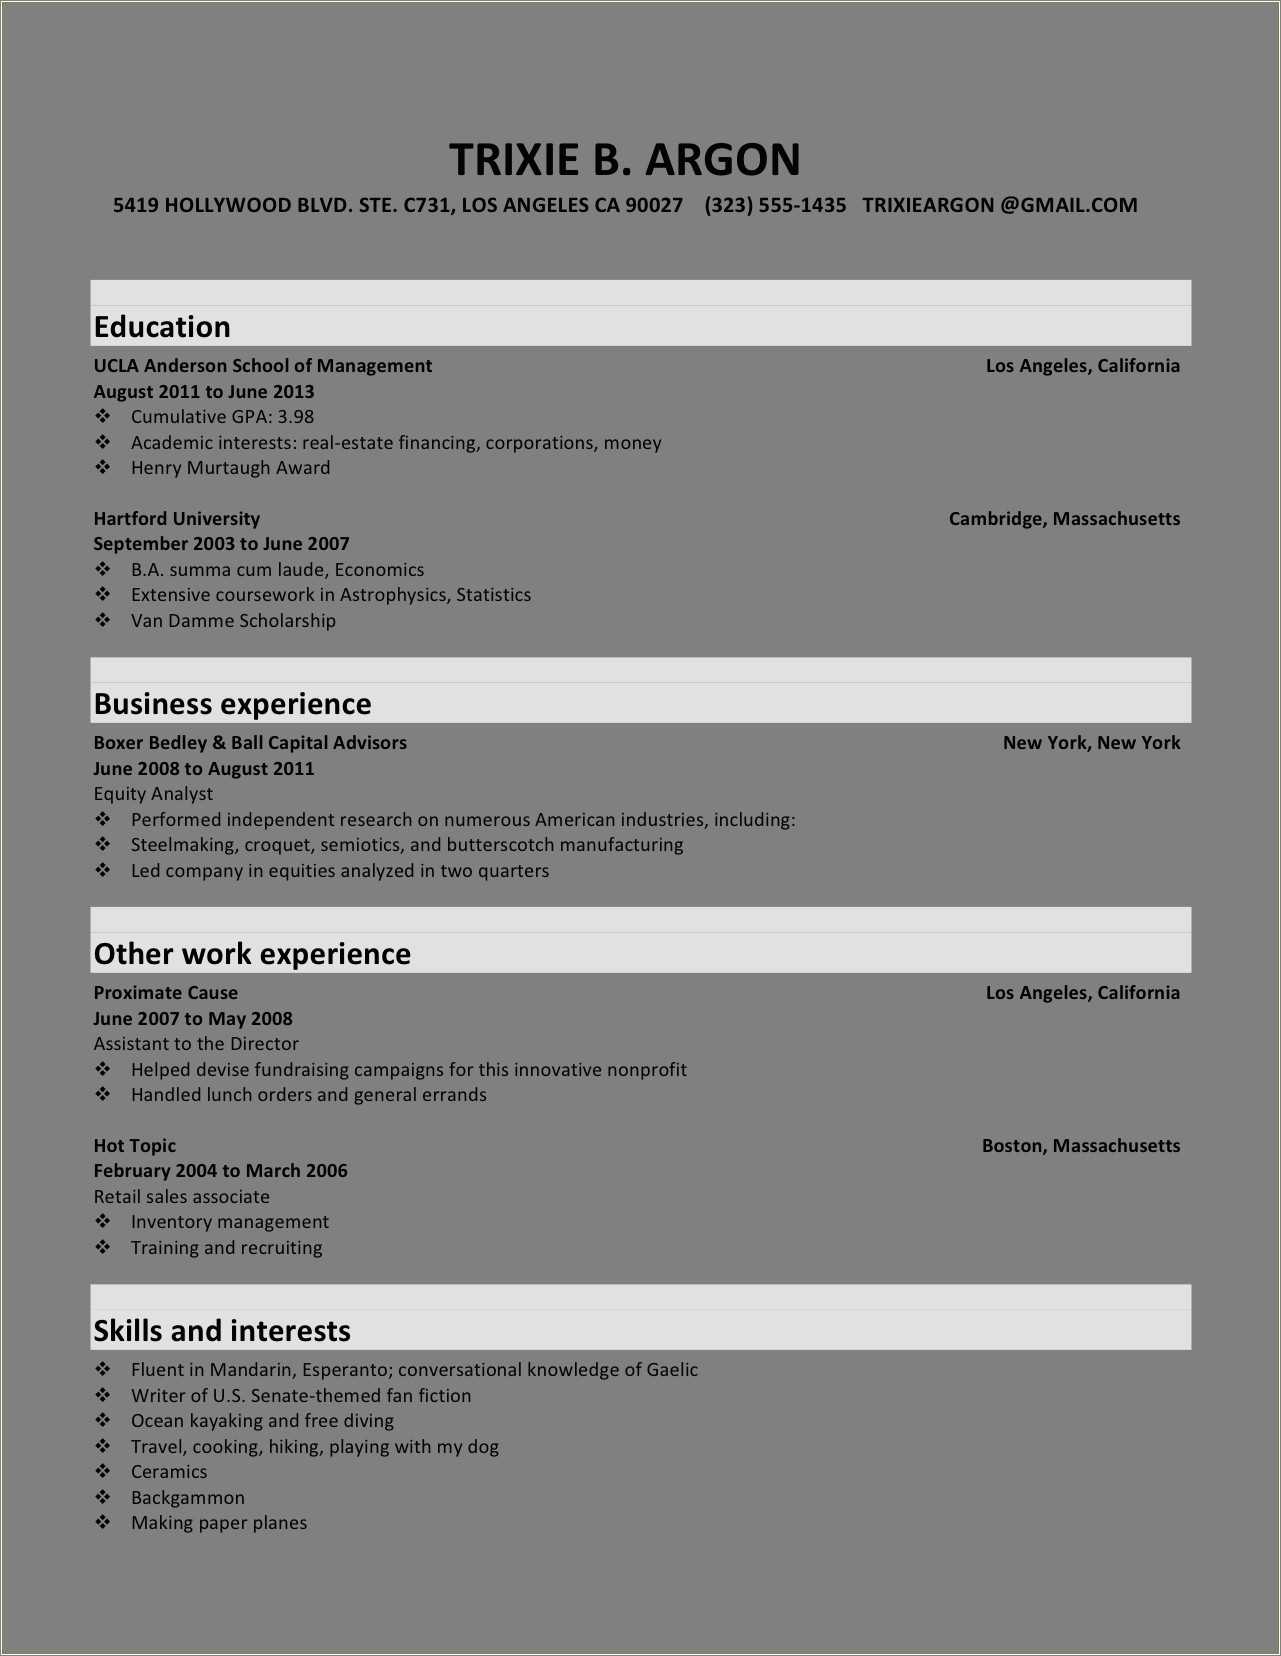 Best Margins To Use For Resume Resume Example Gallery